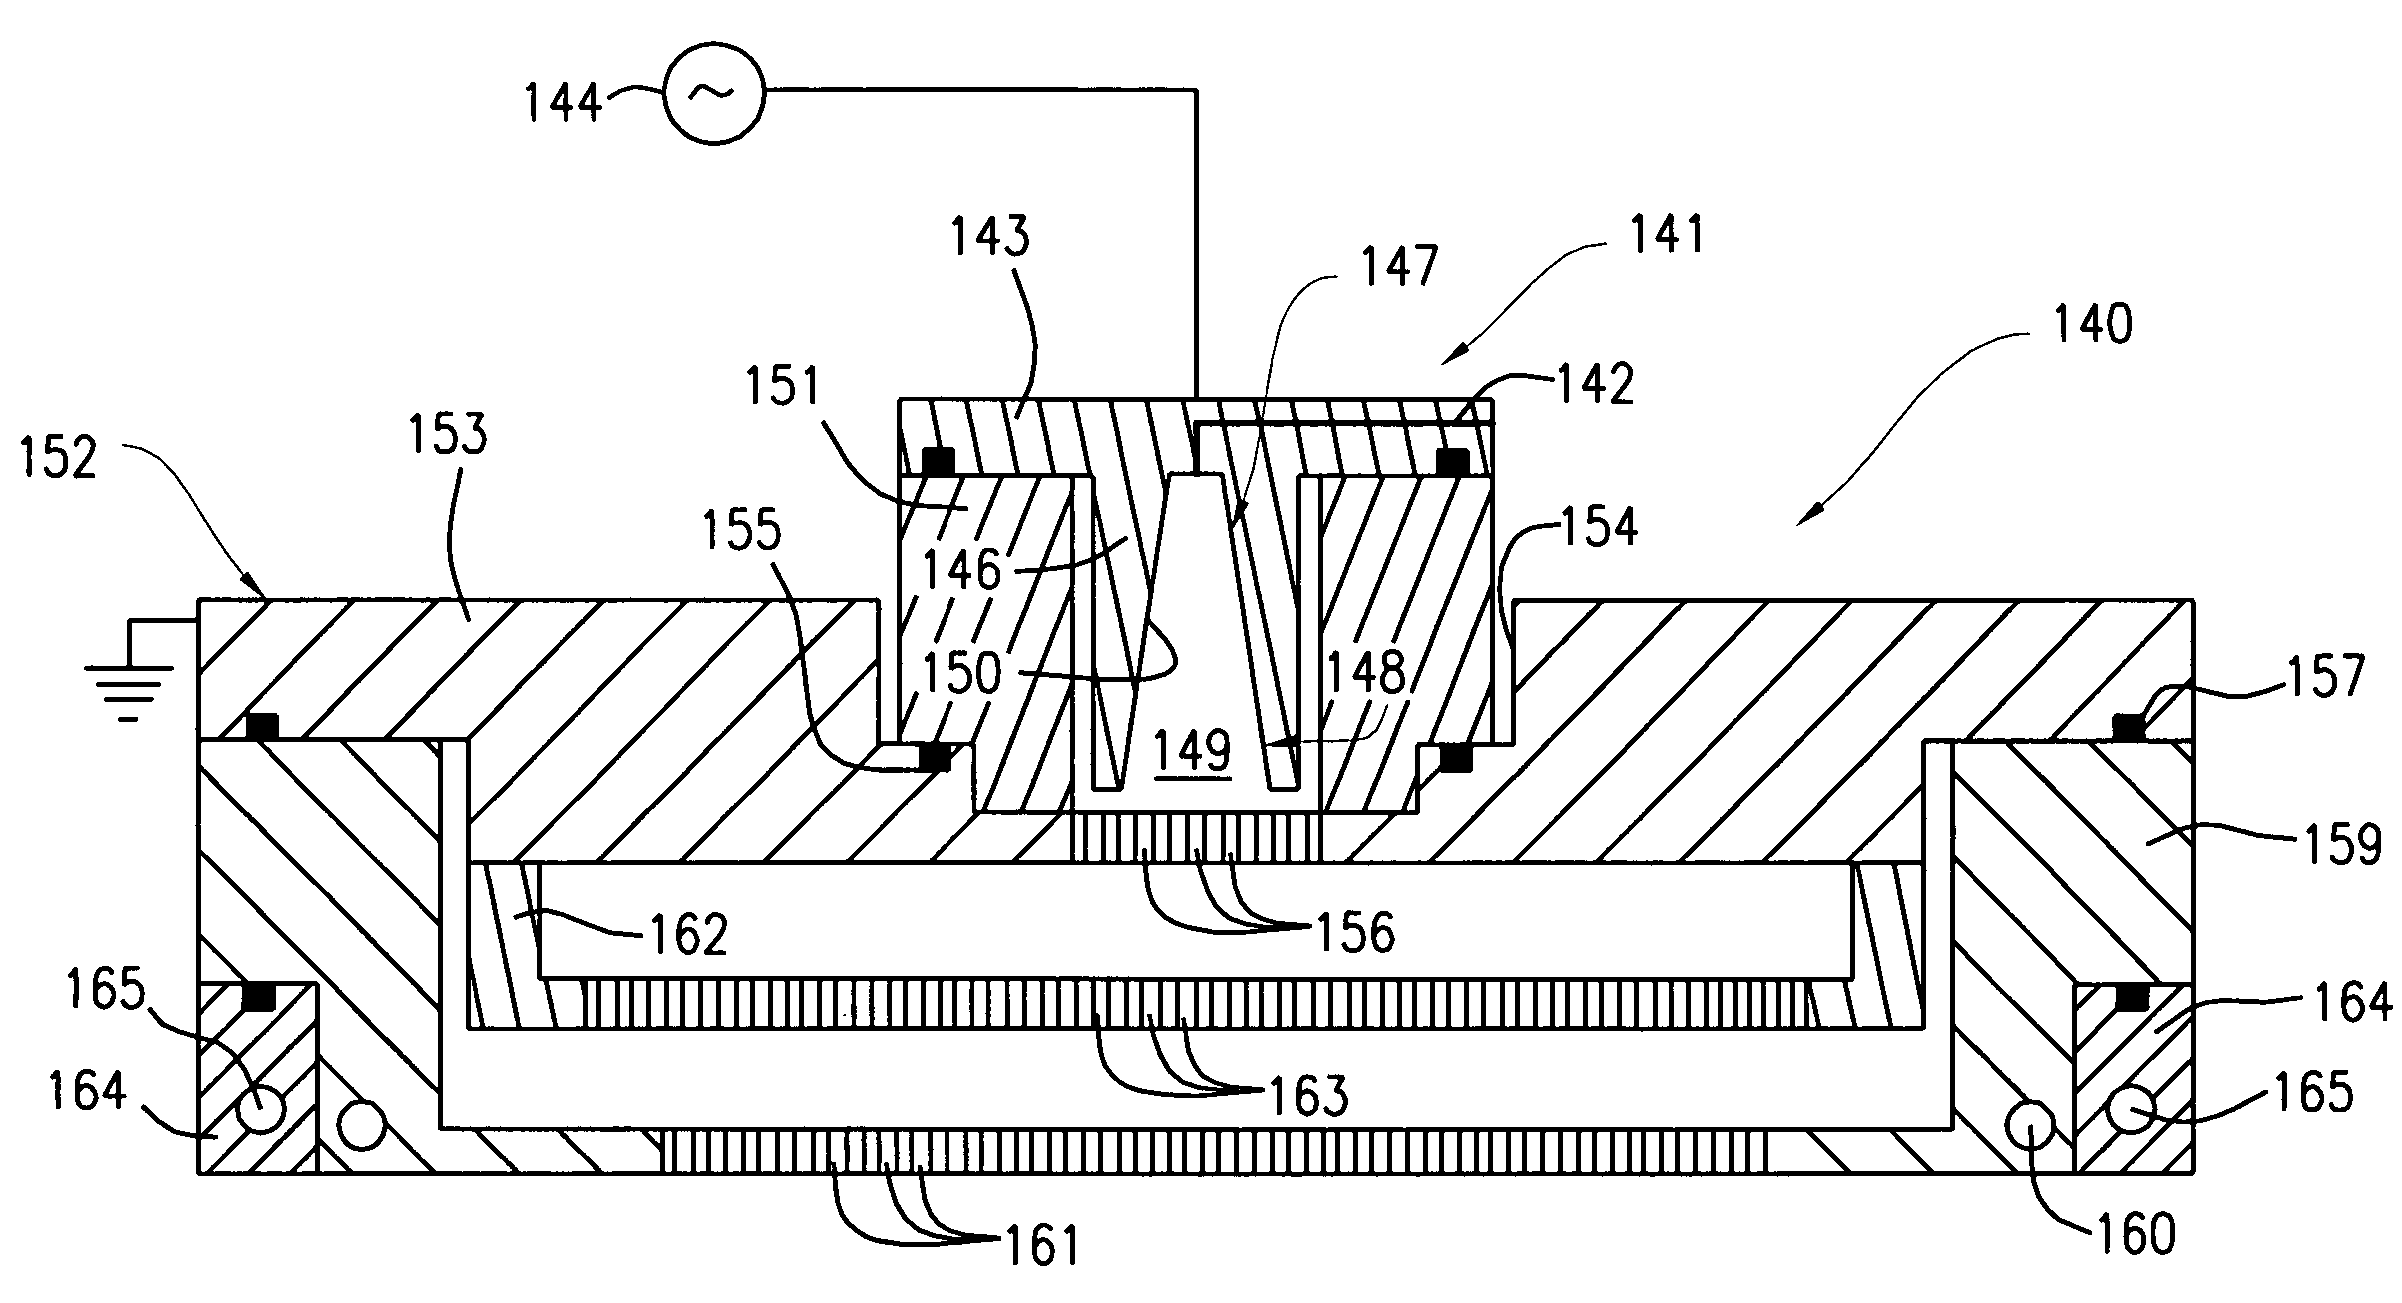 Epitaxial deposition process and apparatus